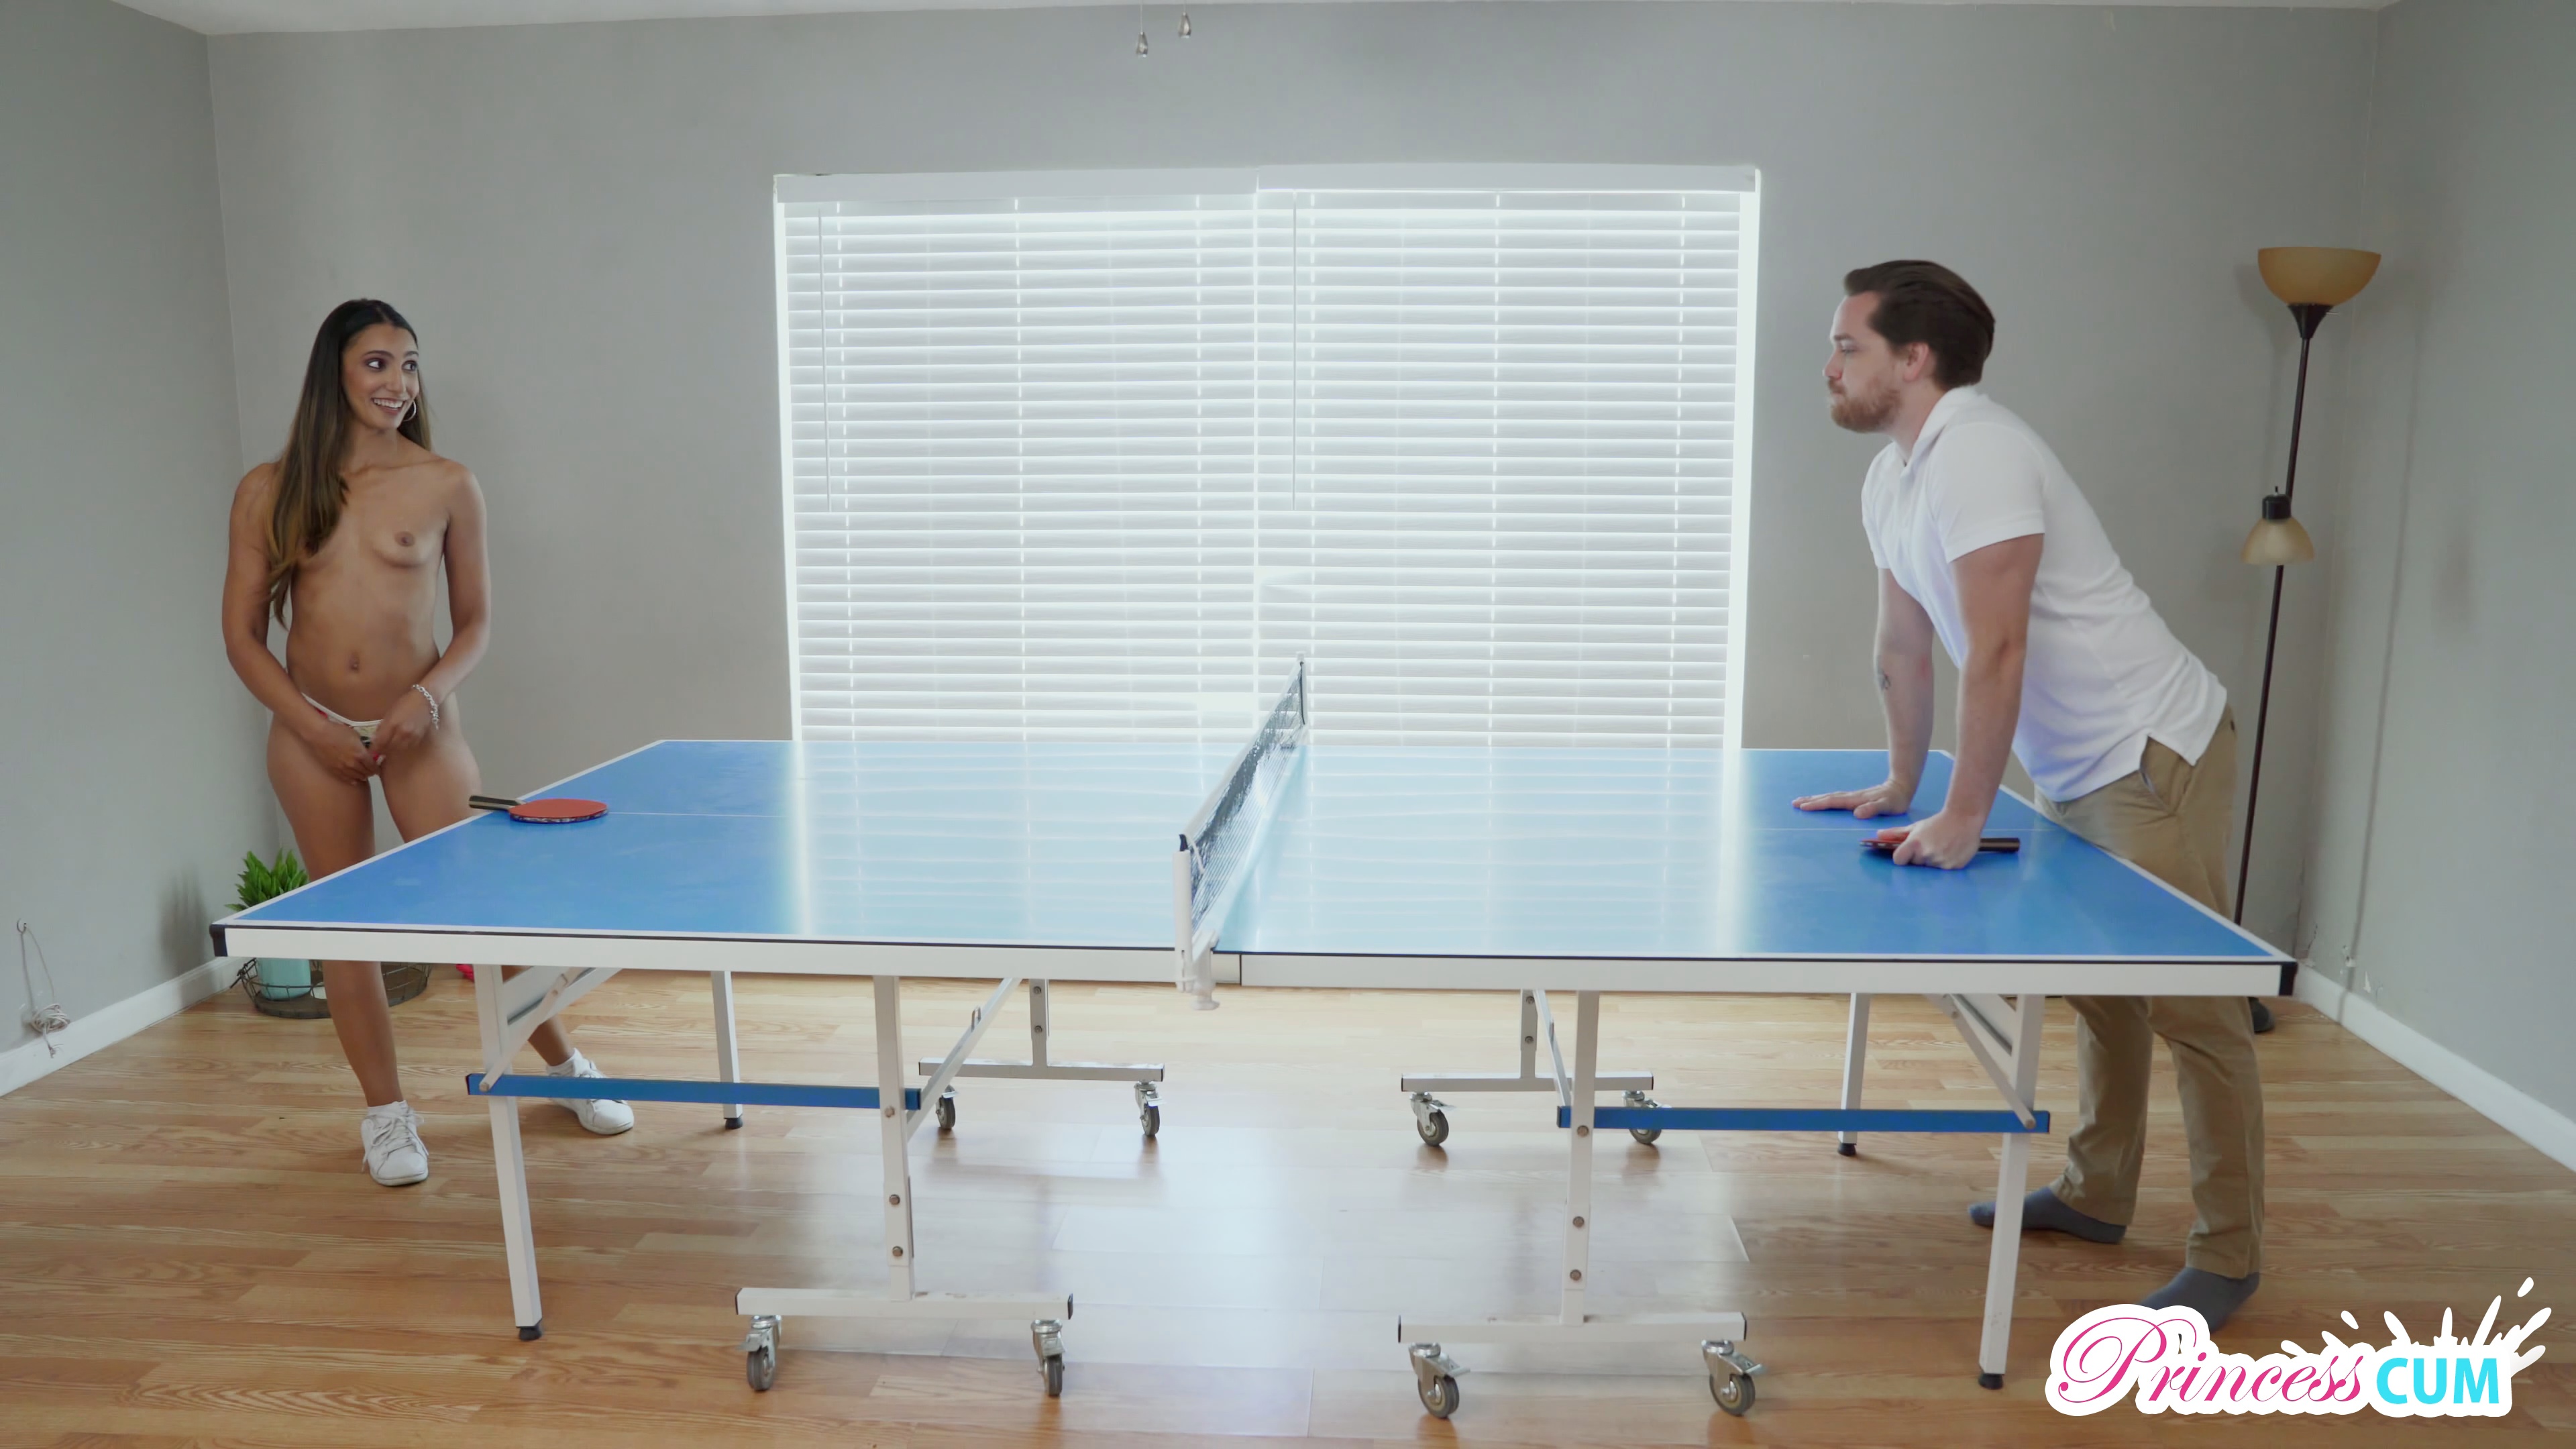 Threesome ping pong table scene